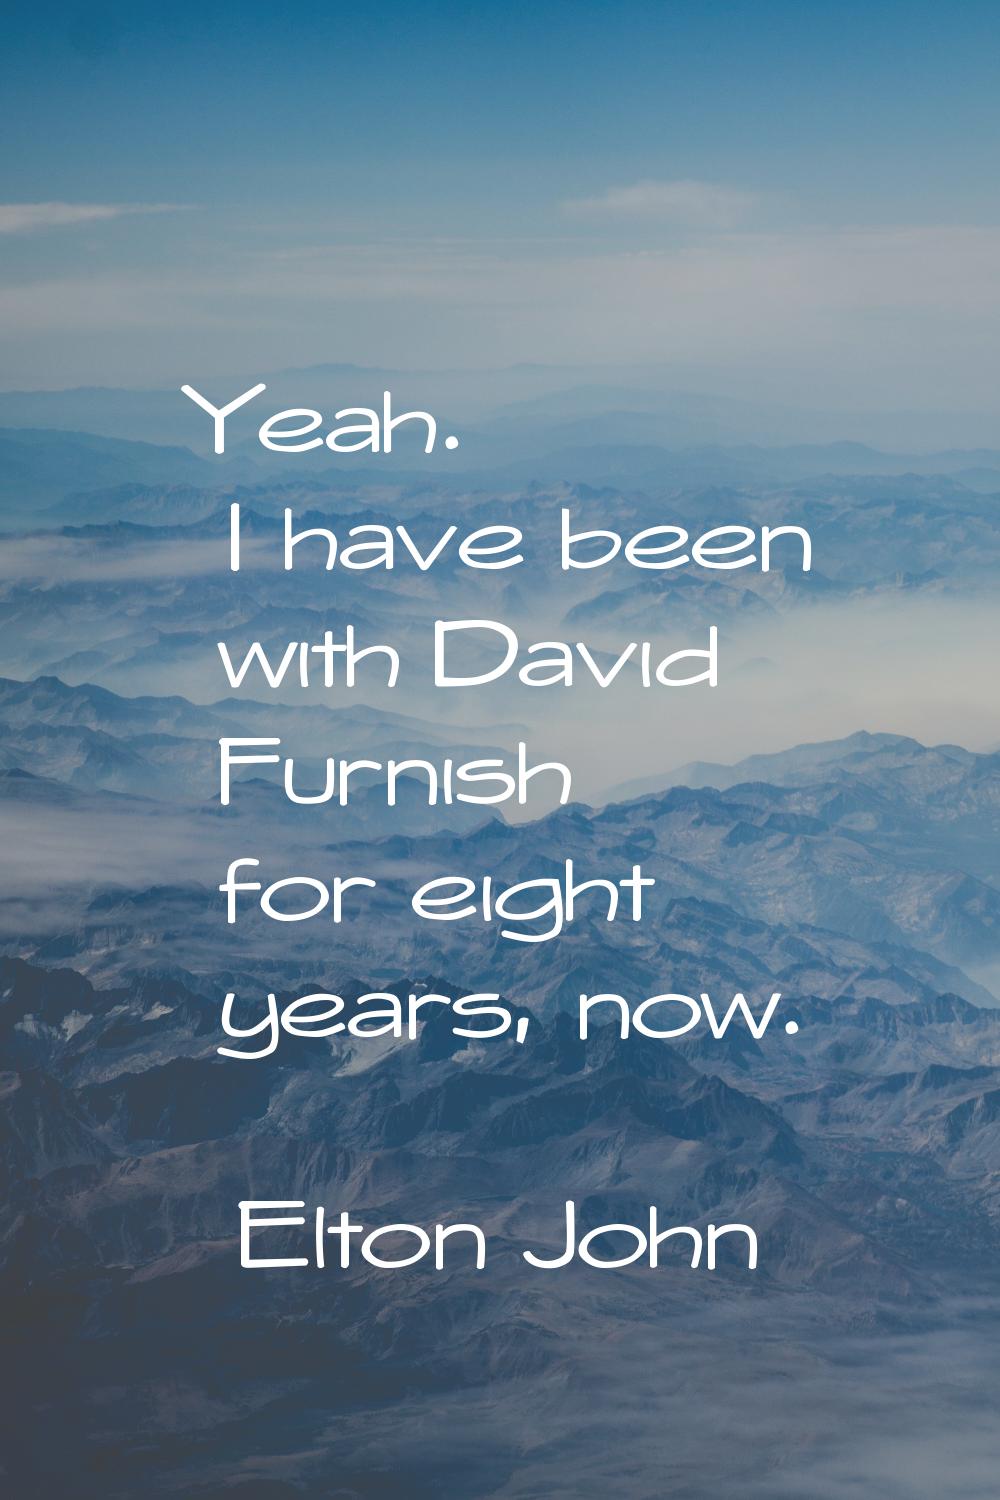 Yeah. I have been with David Furnish for eight years, now.